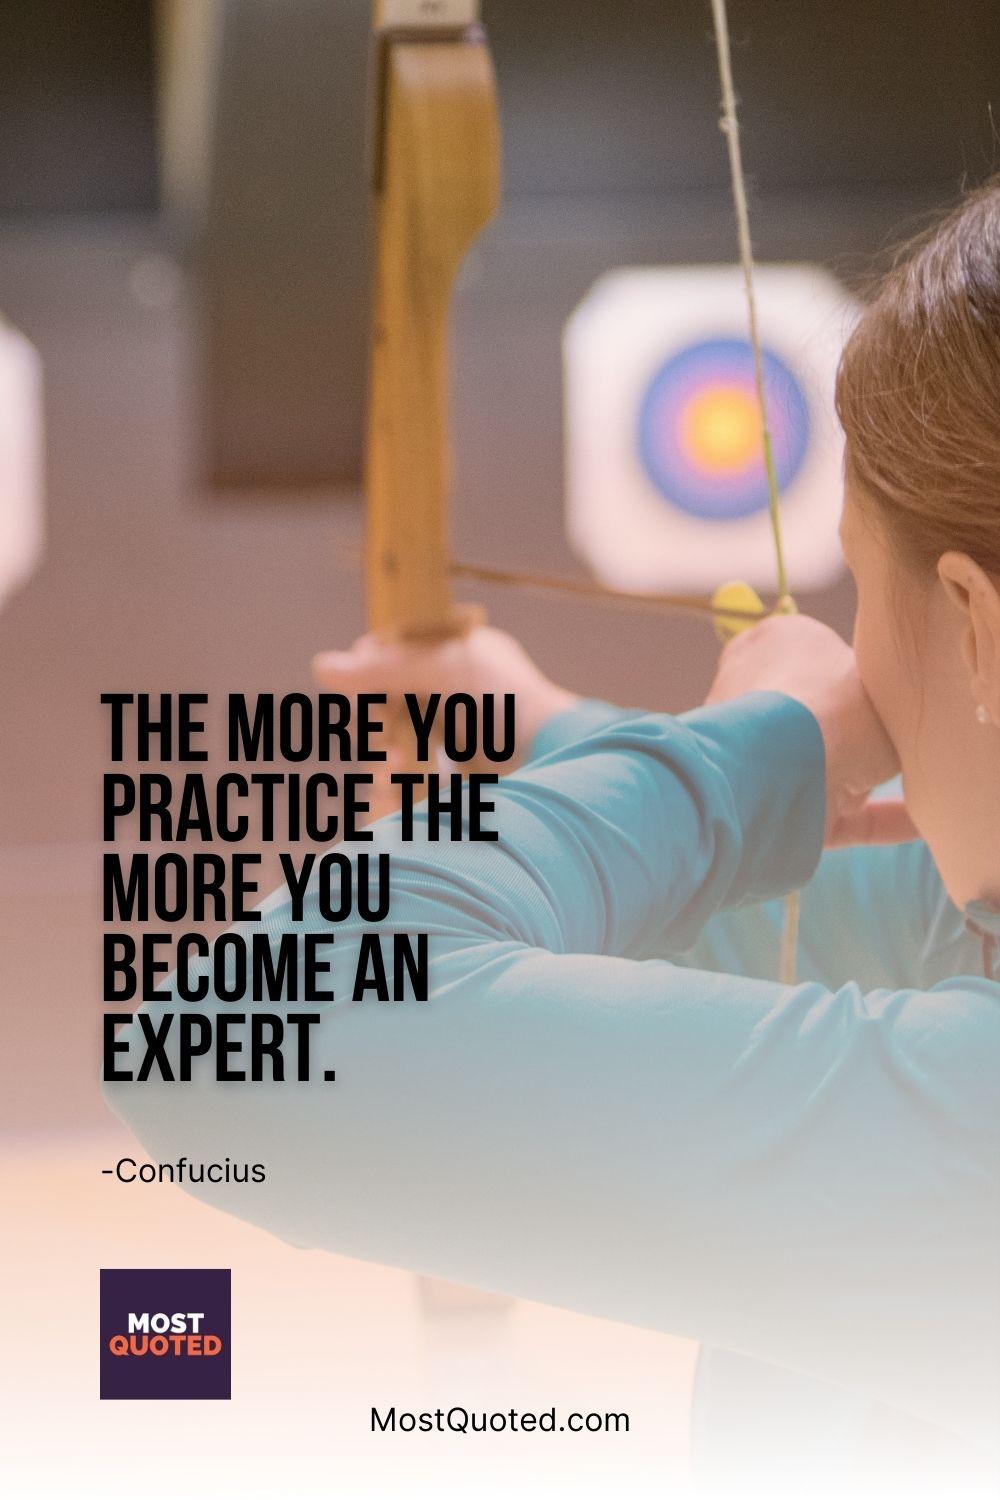 The more you practice the more you become an expert. - Confucius